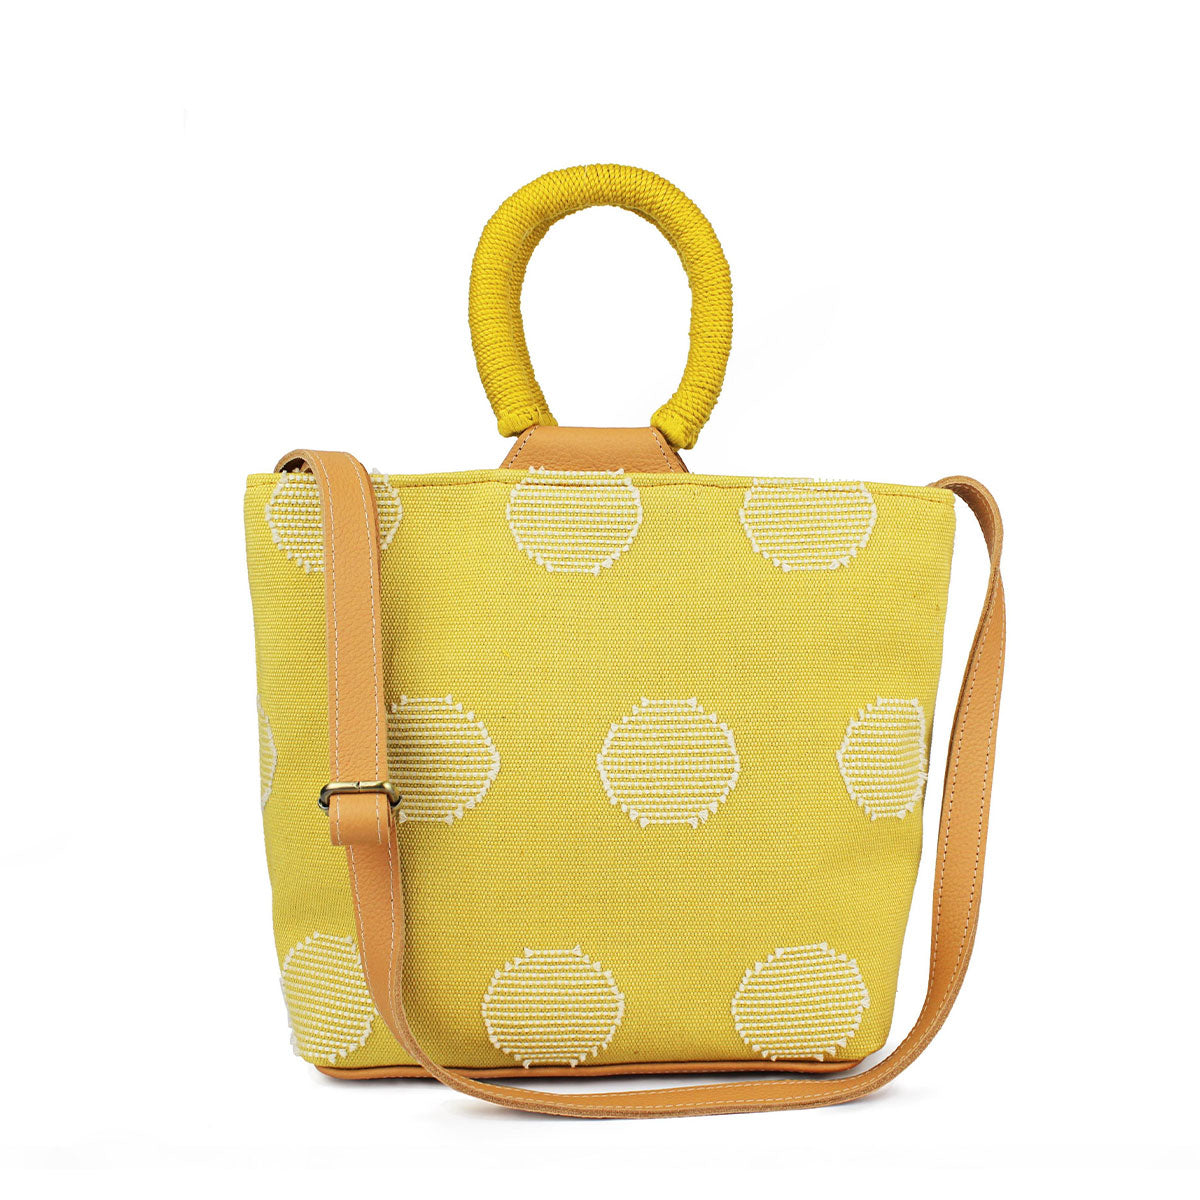 Front of the artisan Dalila Handwoven Sunrise Yellow Midi Tote. The tote has a bucket shape with rounded handles coiled in yellow thread. The pattern has white circles over a lemon yellow background. It has an adjustable leather strap.